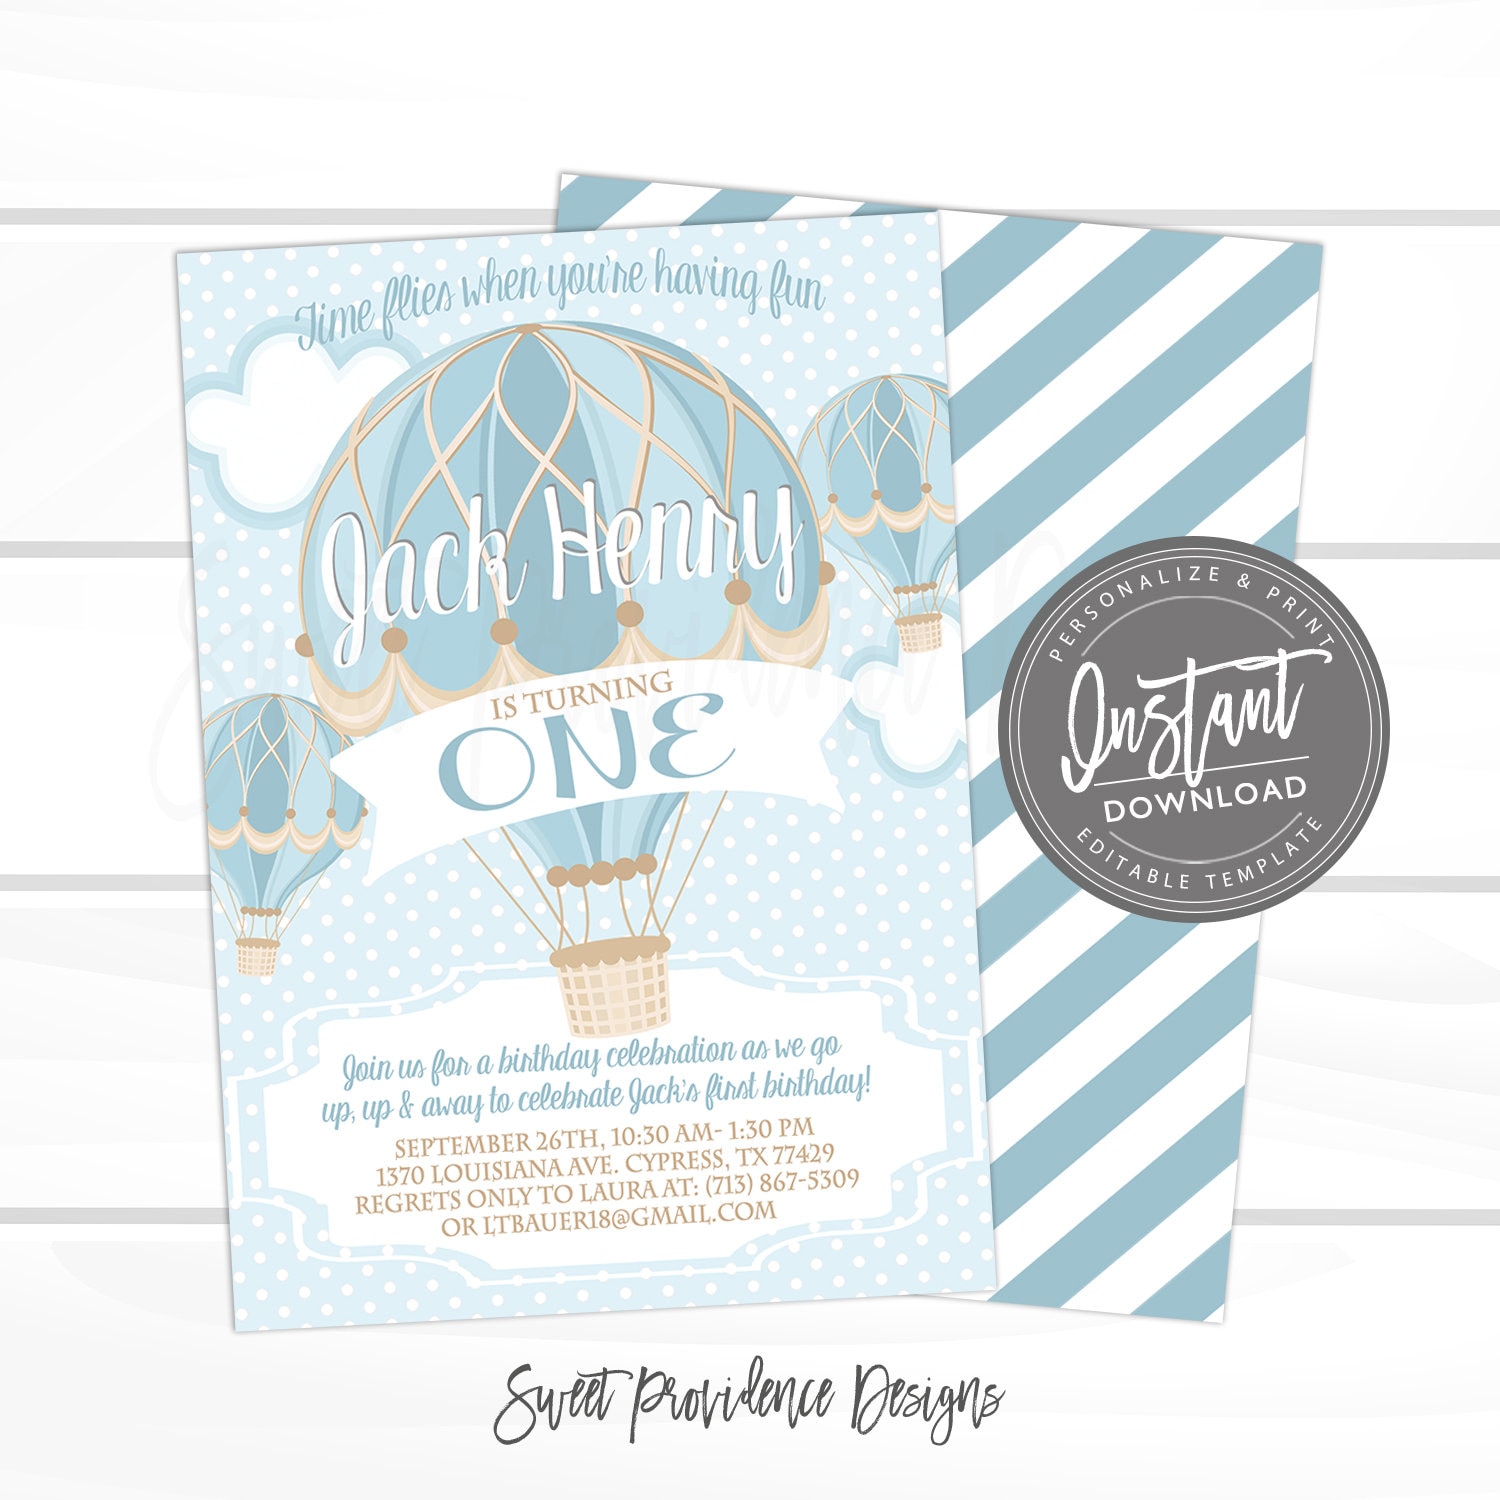 Blue Hot Air Balloon Birthday Party Invites Childrens Birthday Party Invitations Personalised Blue Hot Air Balloon Birthday Party Invitations 10